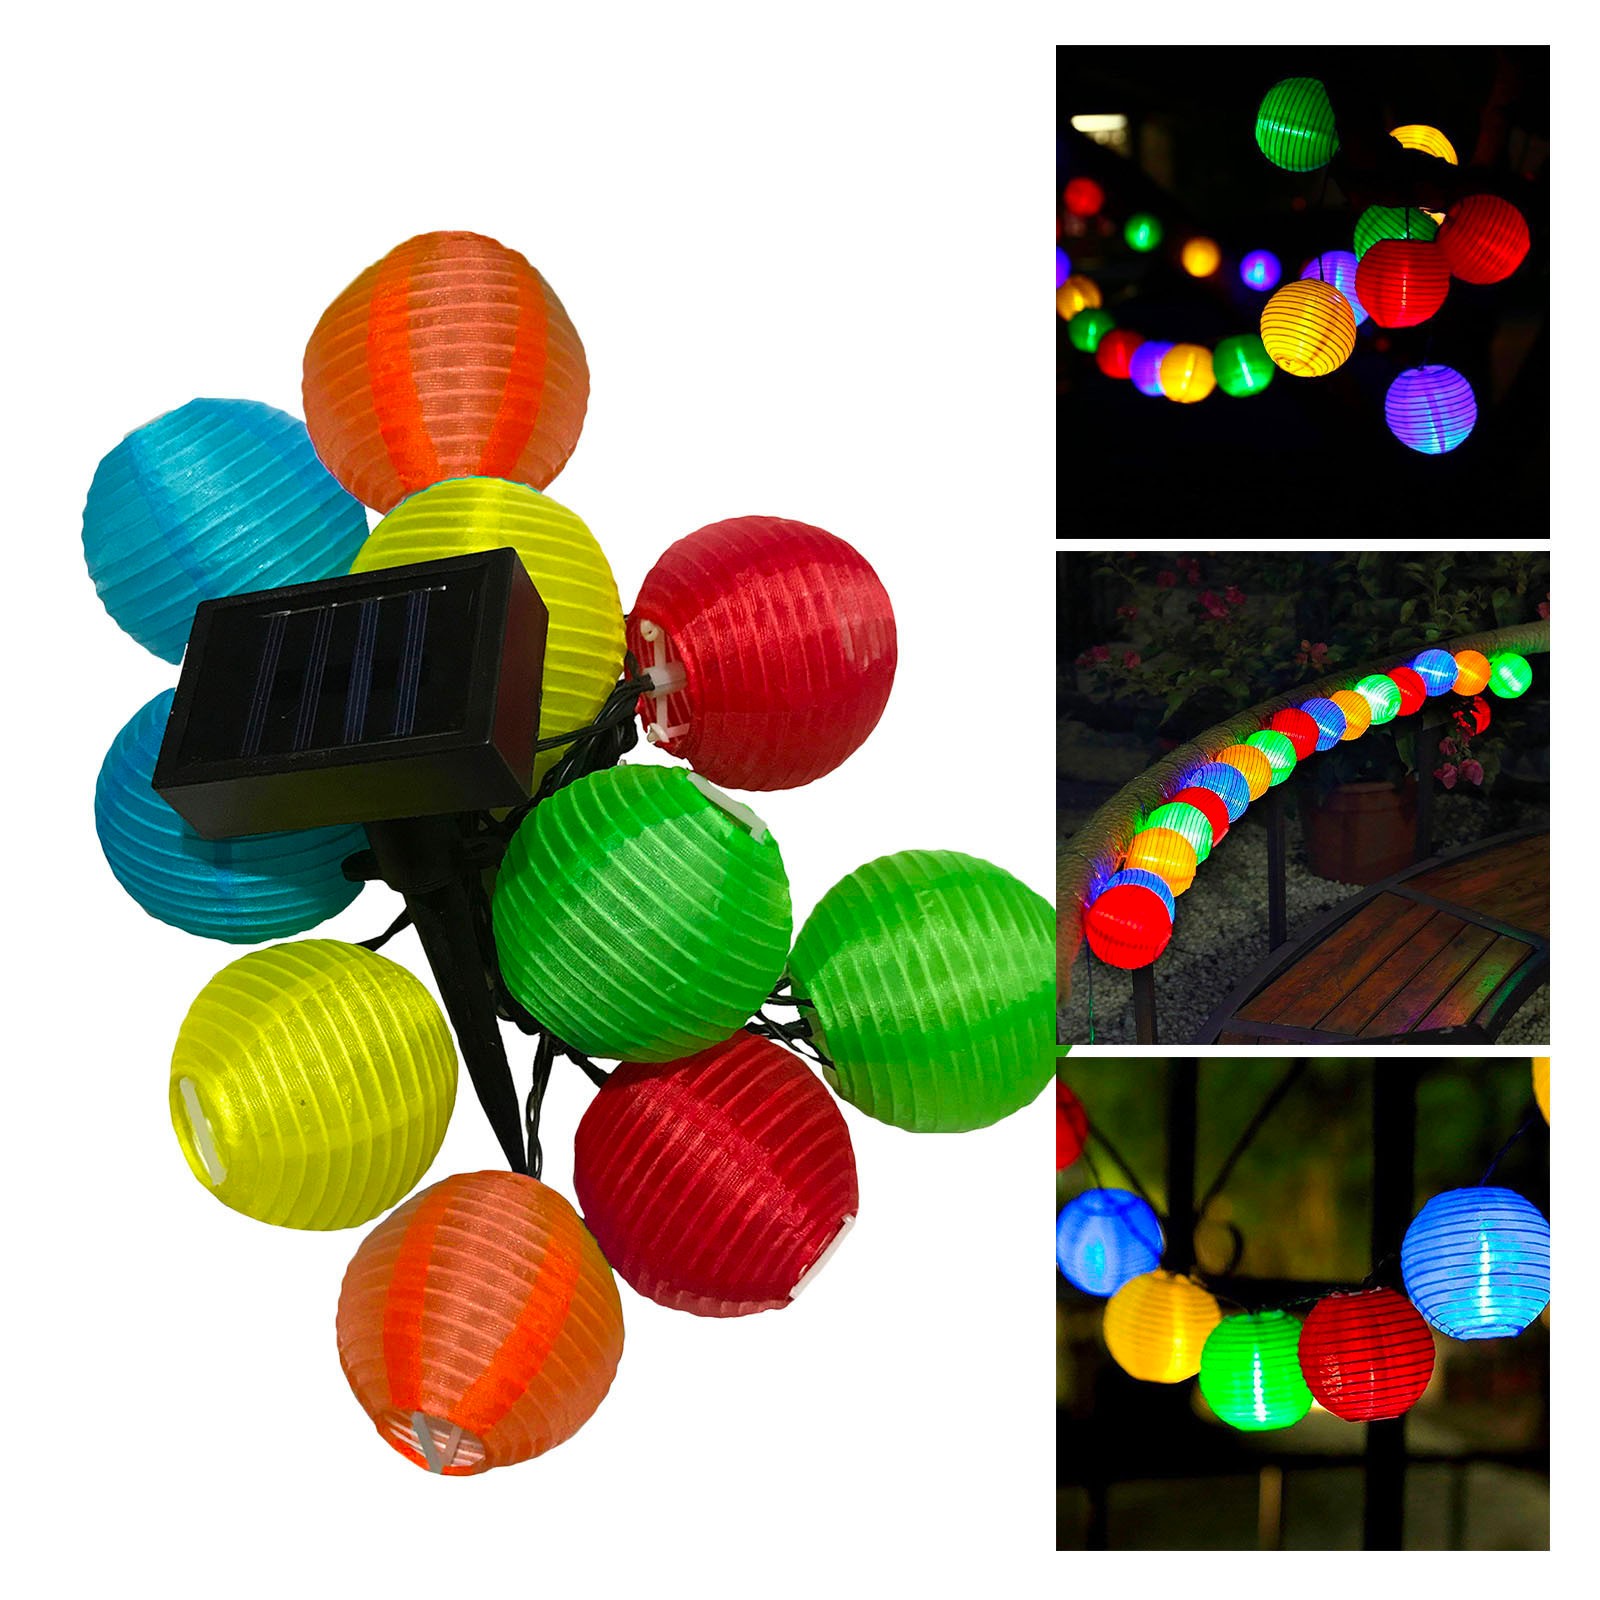 Led Dome Christmas Lights Solar Garden Lamp Waterproof 10 Outdoor Solar String Lights For Garden Outdoor Wedding Party 20led Warm Lights Wire - image 2 of 9